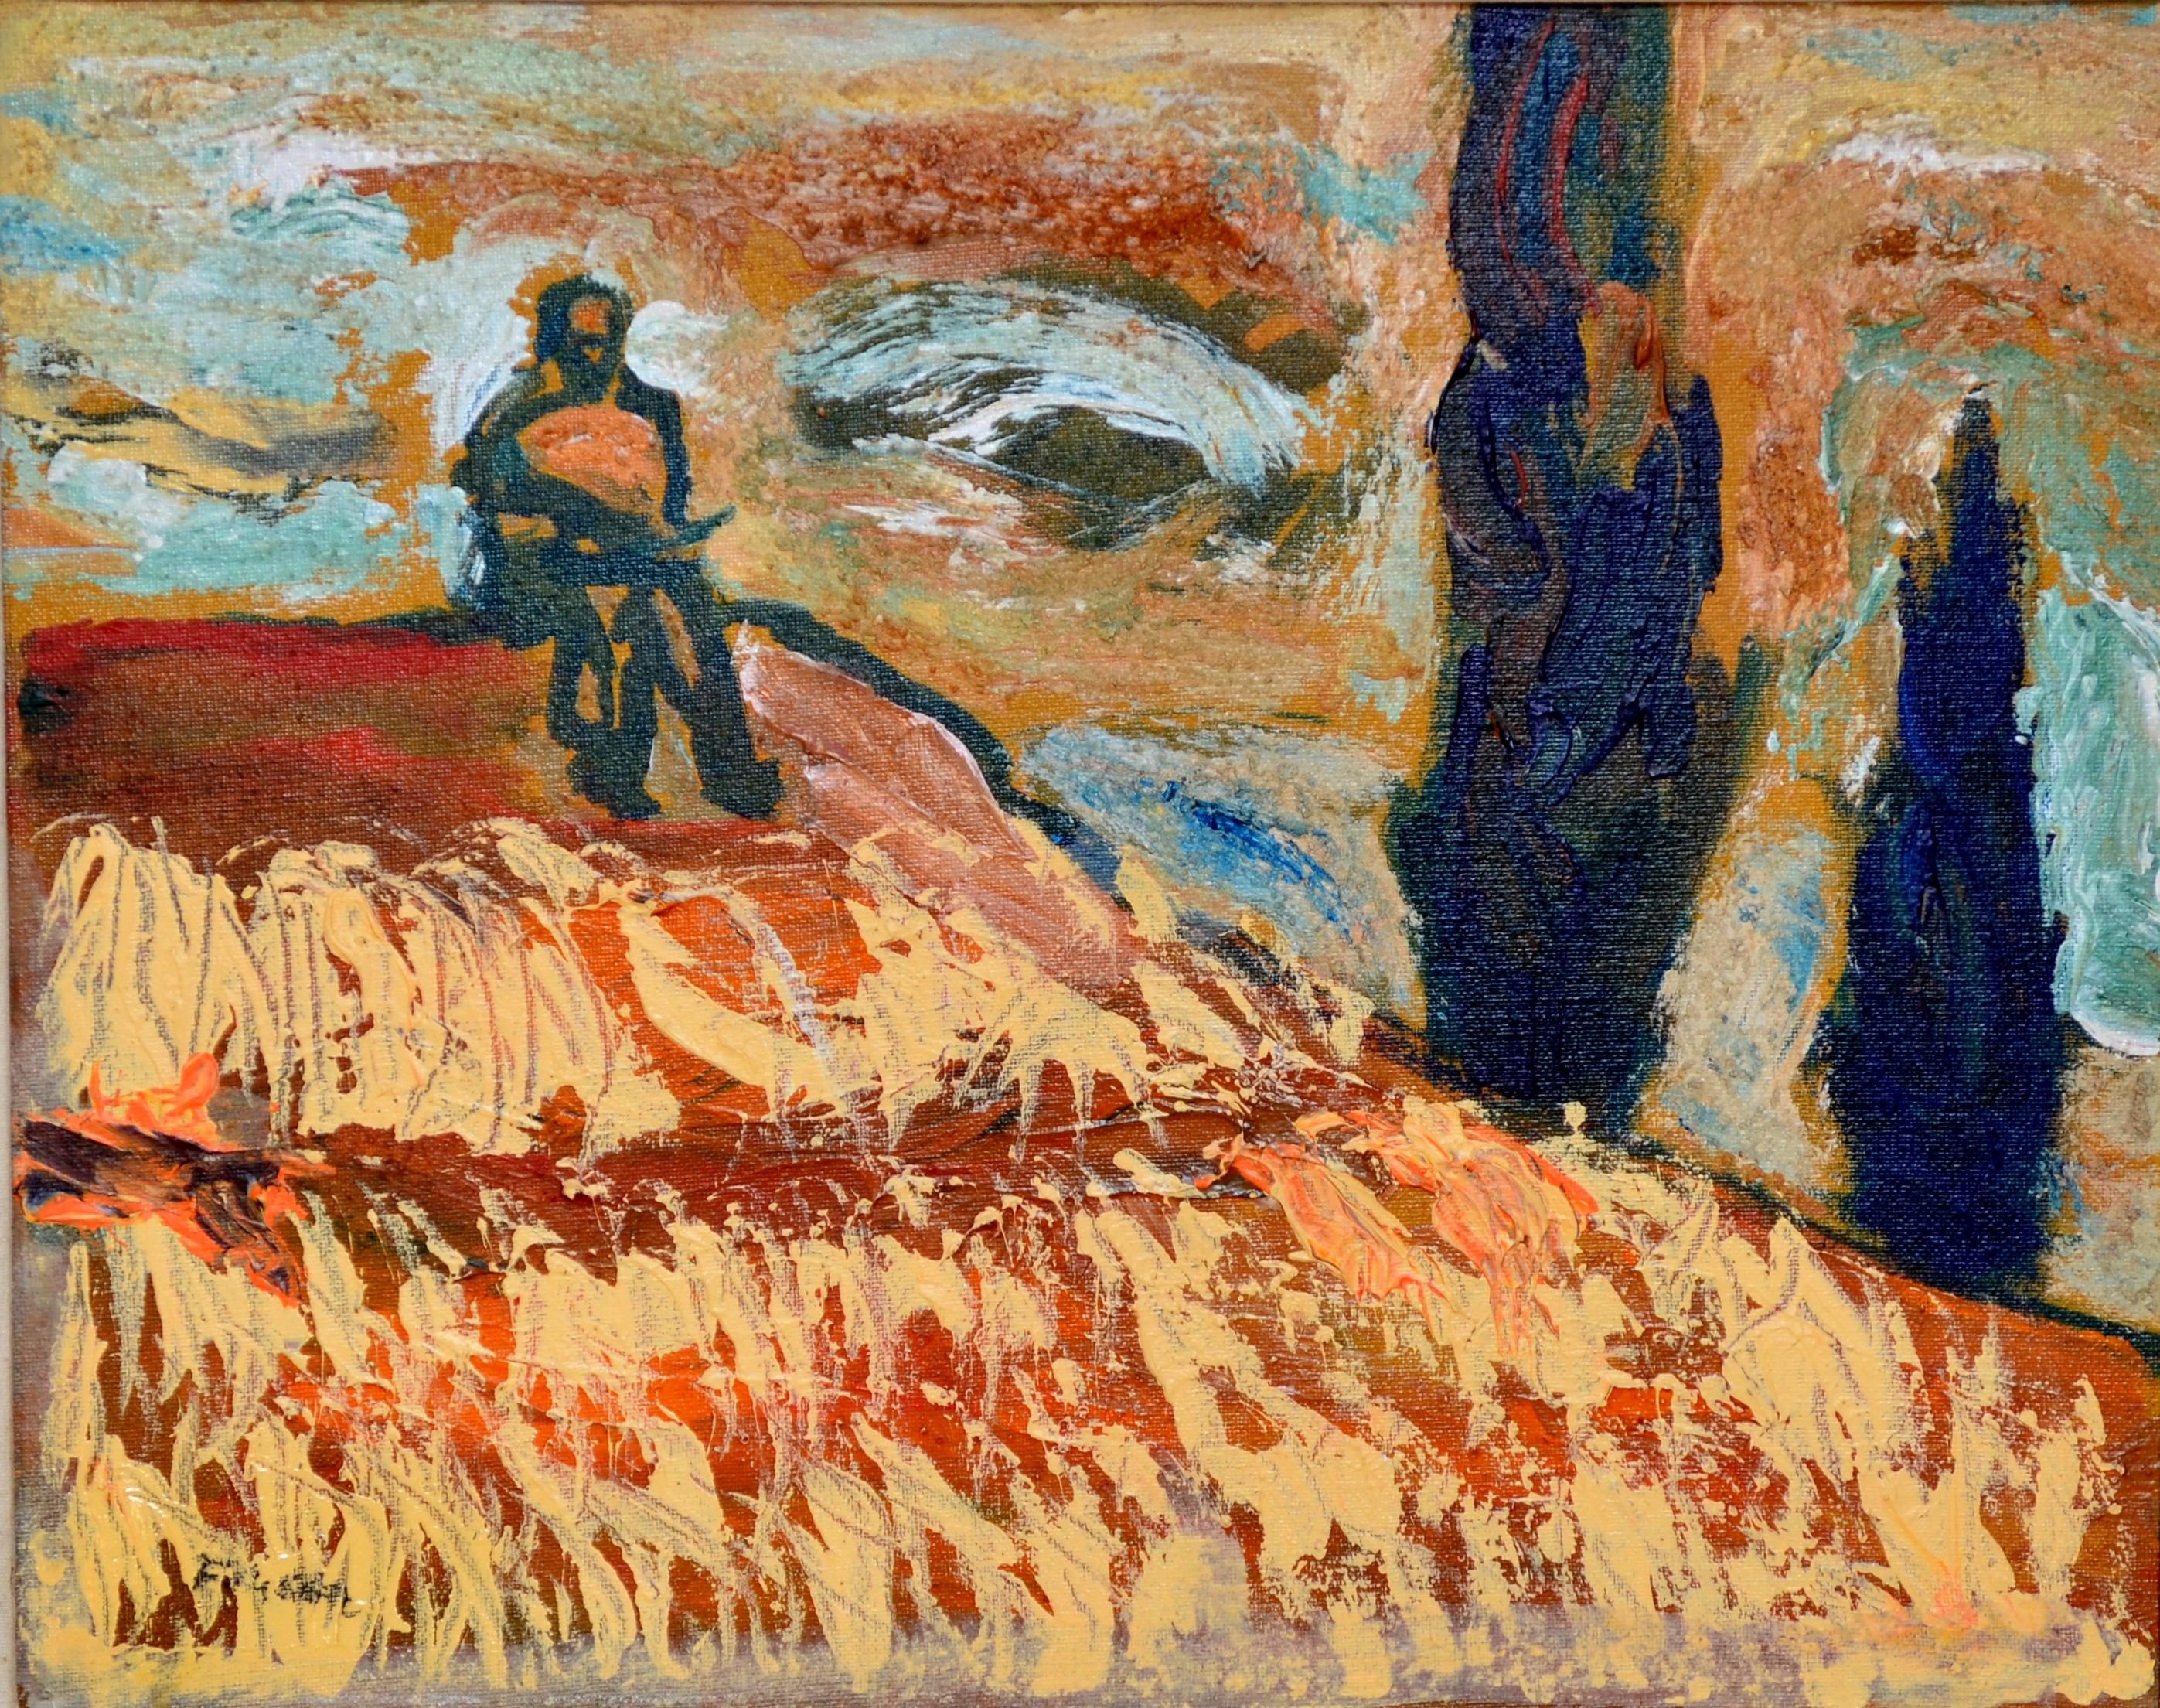 Luis Filcer Landscape Painting - "Van Gogh in the cornfields" - Horizontal landscape with figure in brown tones.